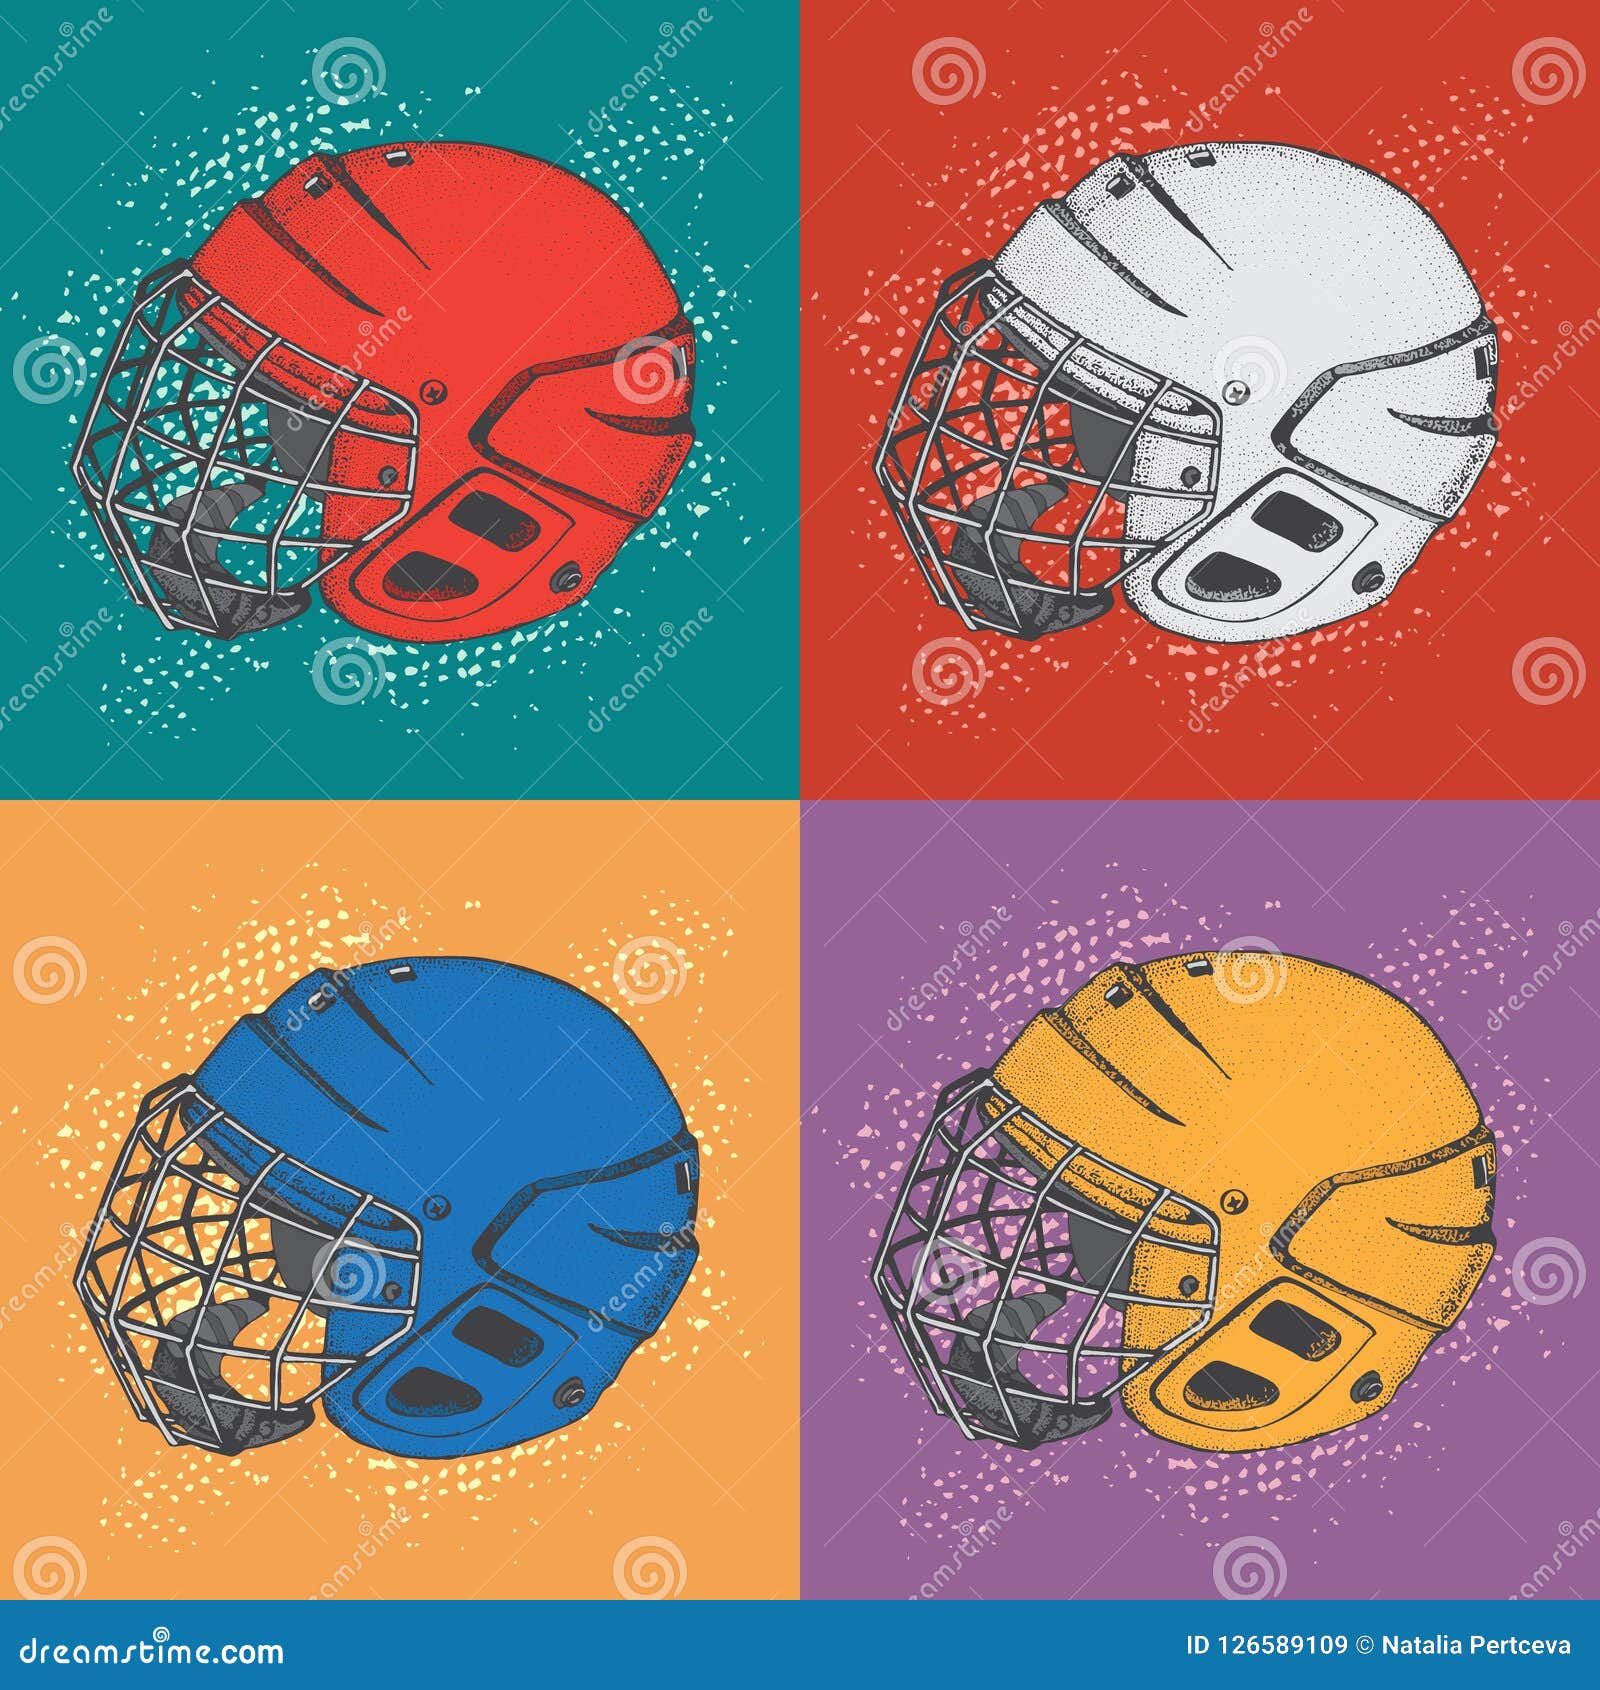 Download Pop Art Hockey Helmets With Mask. Side View. Sports Vector ...